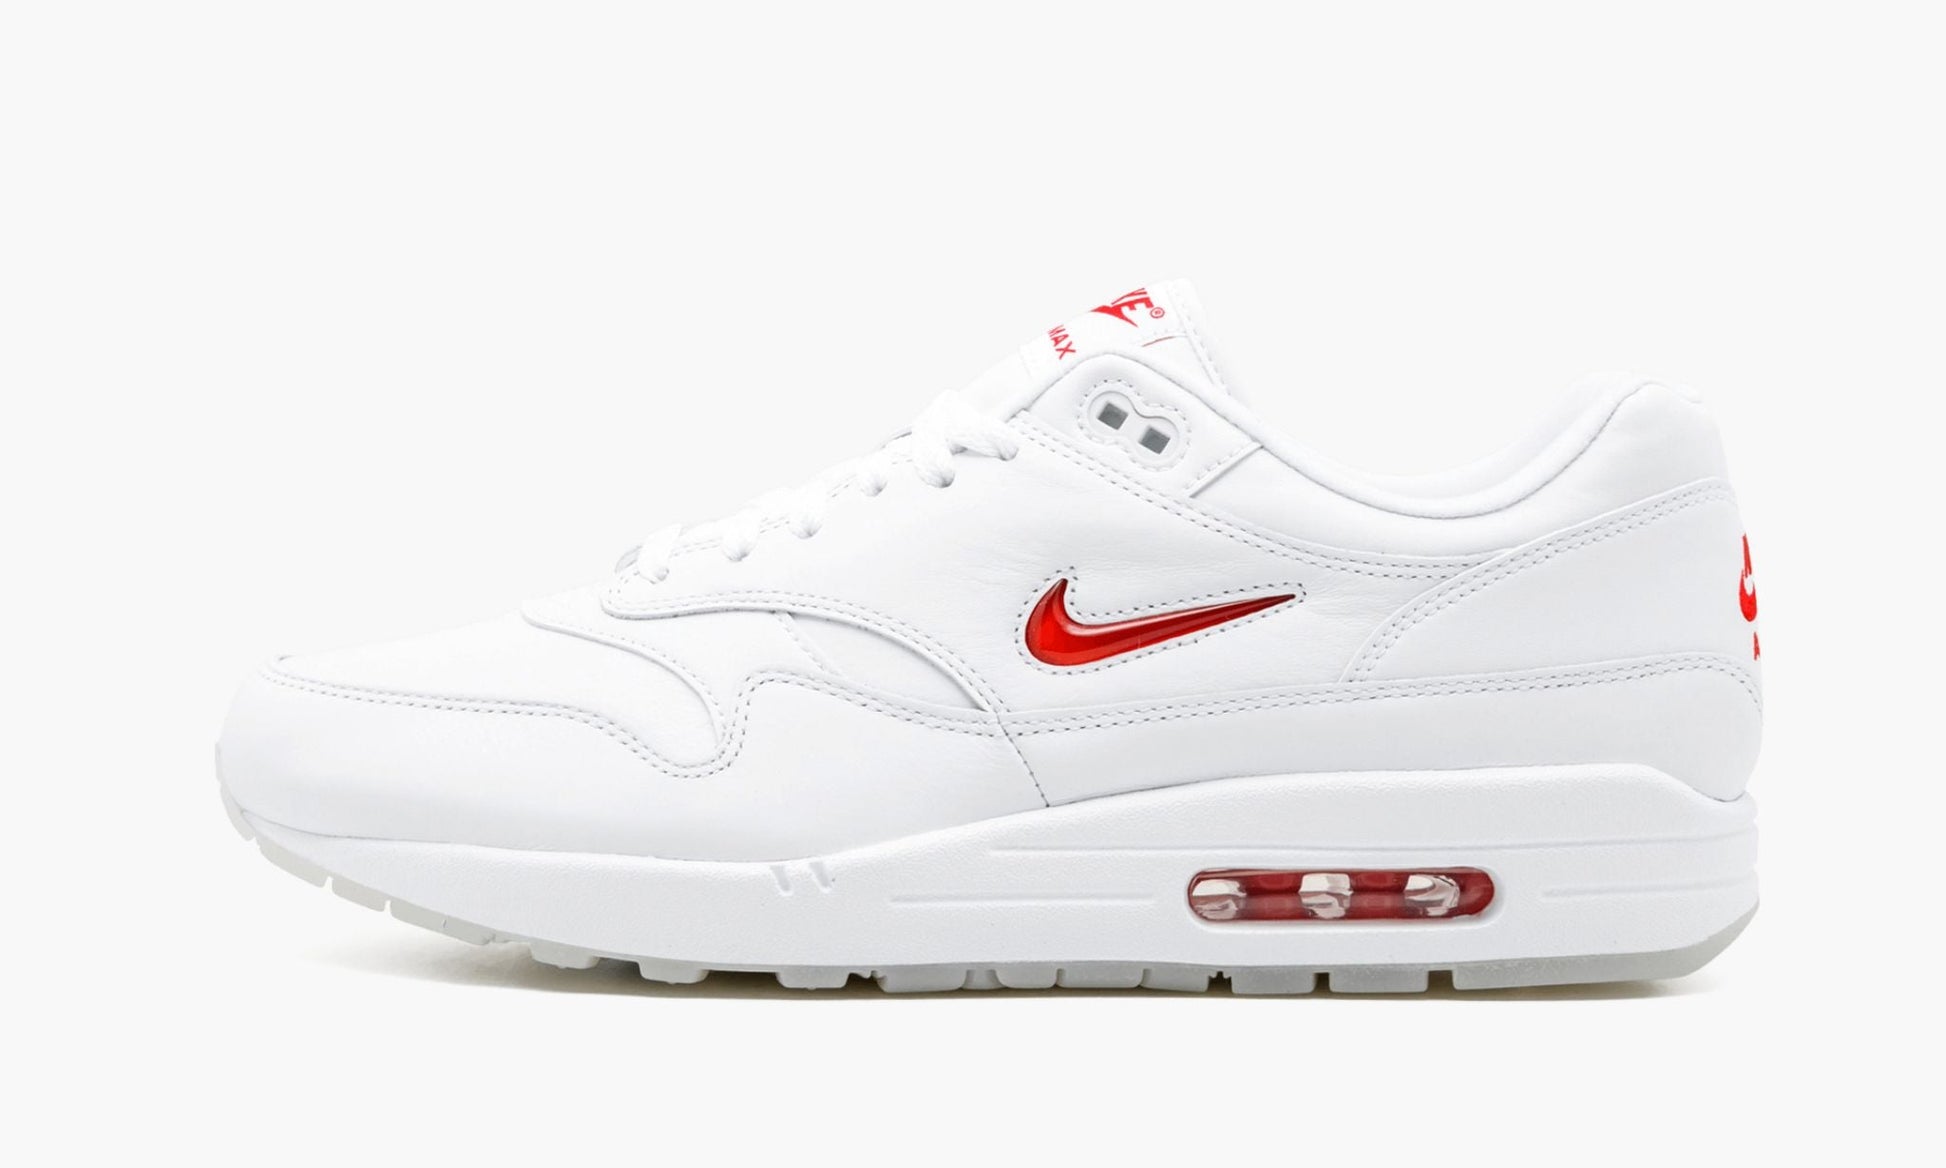 Air Max 1 SC Jewel "White / Red"